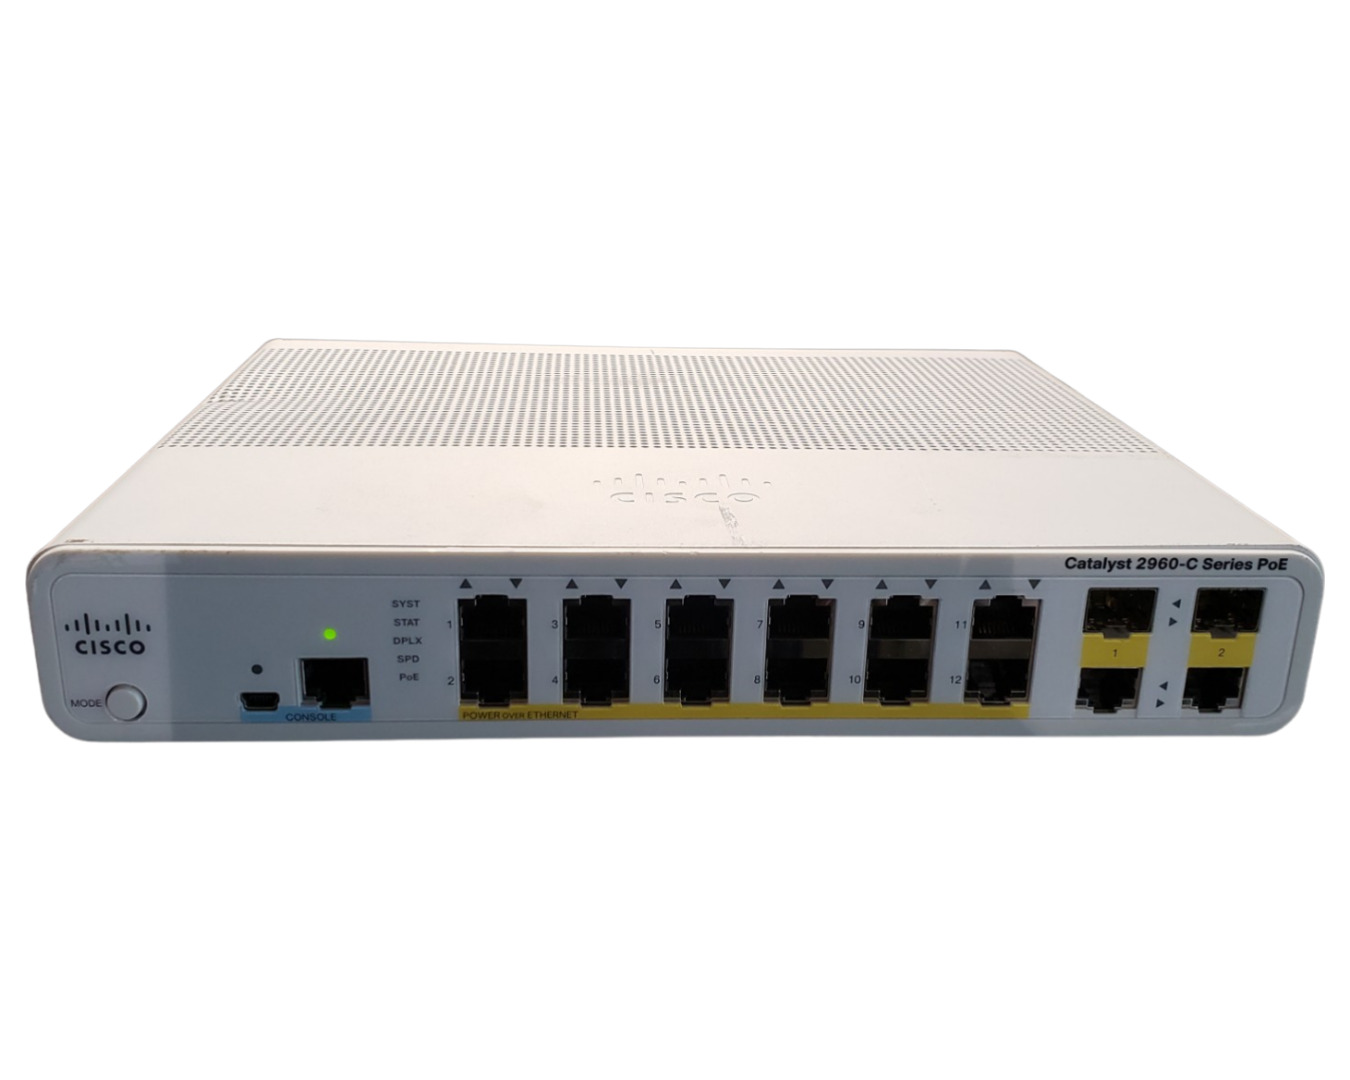 Cisco Catalyst 2960-C Series PoE Network Switch AS IS